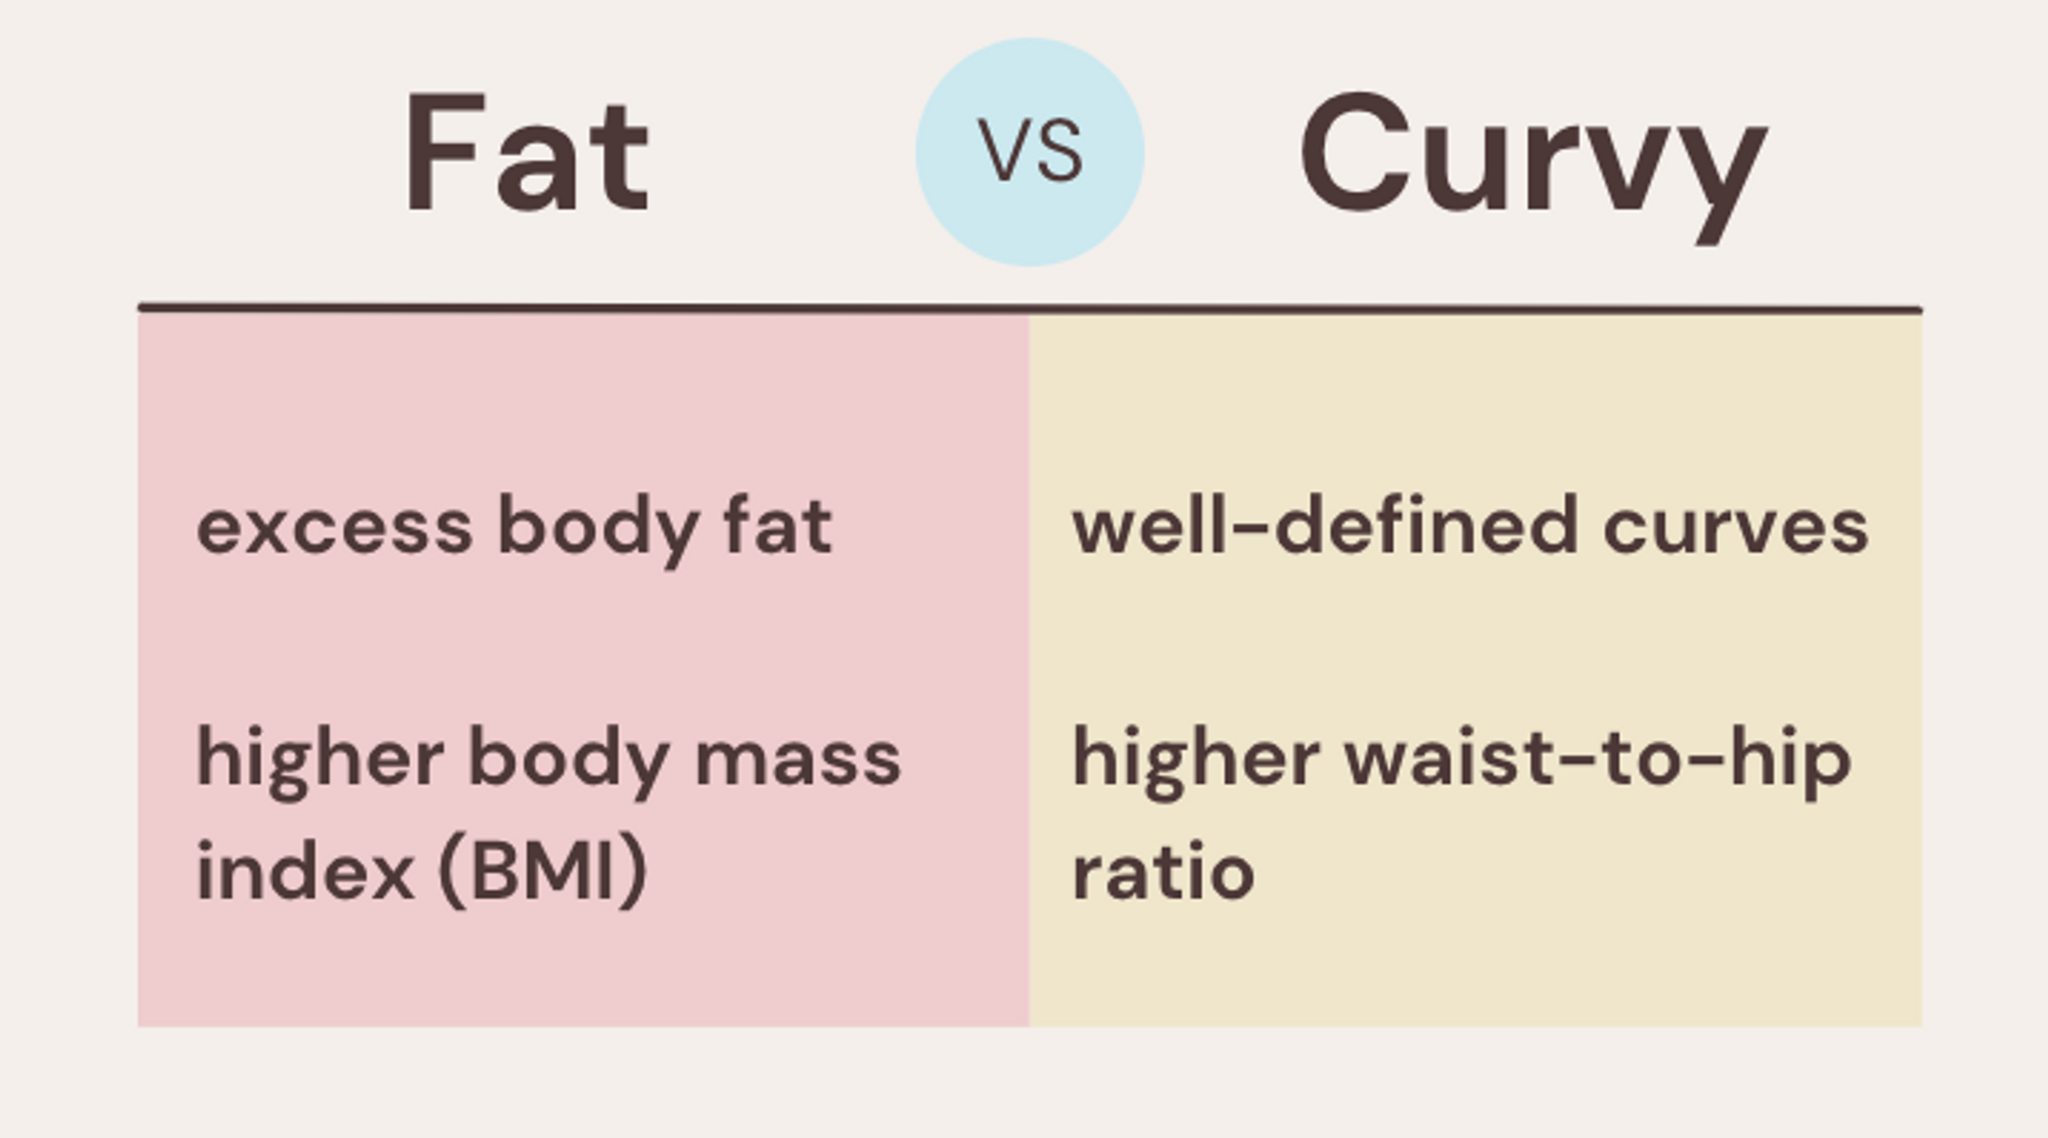 the differences between fat and curvy